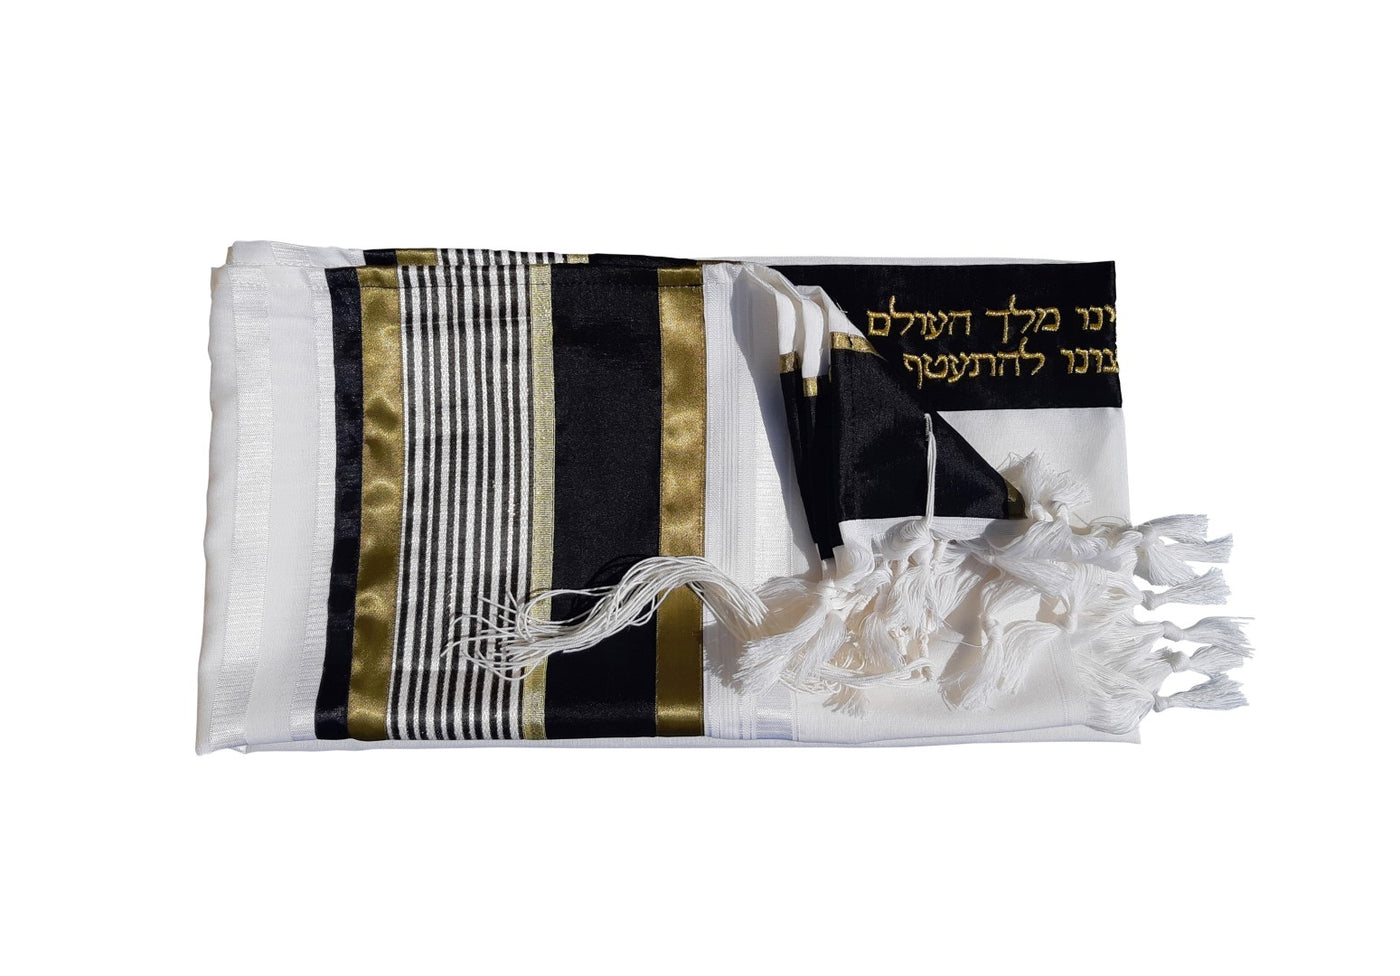 JOSEPH Gold, Black and Olive Green decorated Wool Tallit for men – Bar Mitzvah Tallit, Hebrew Prayer Shawl, Tzitzit Wedding Tallit, Tallit Prayer Shawl, Contemporary Tallit flat